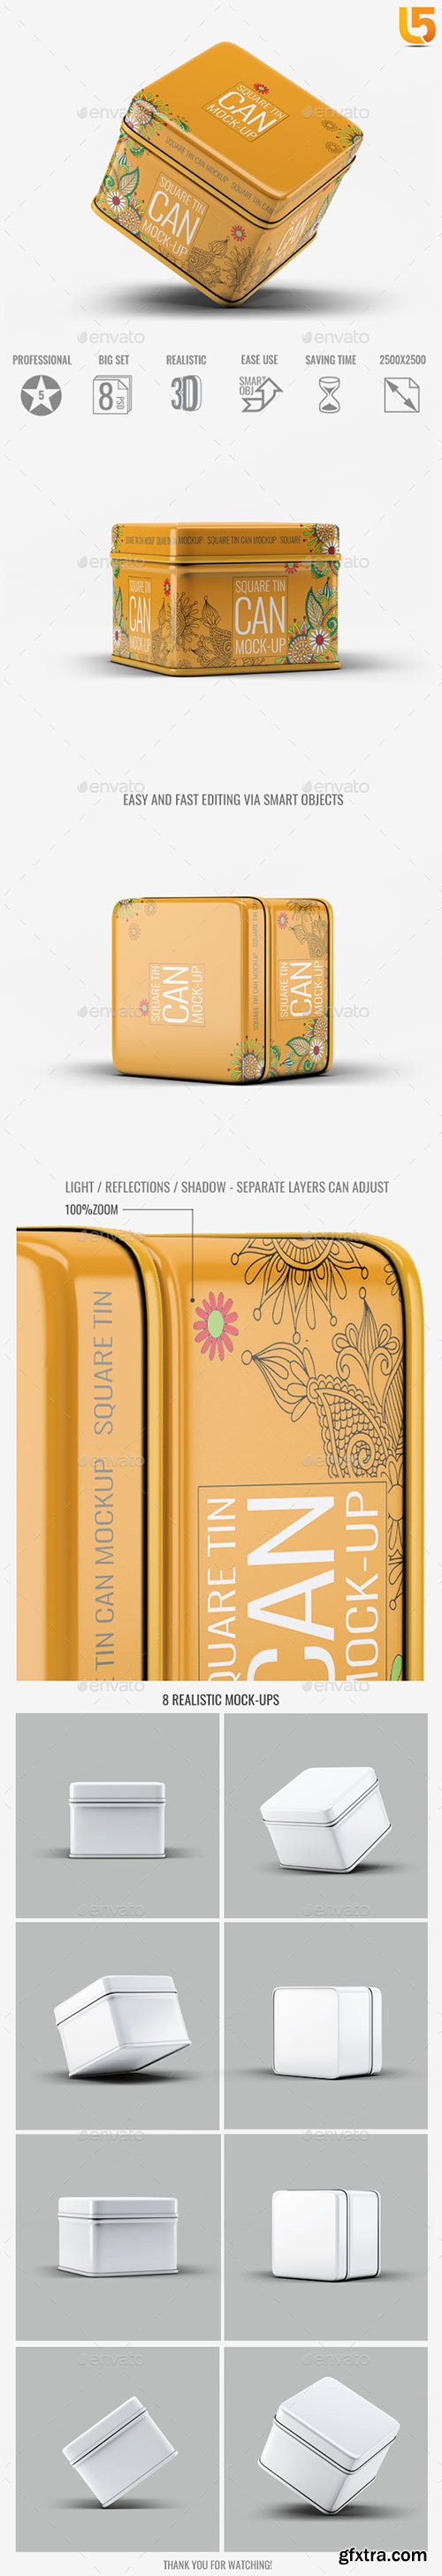 Graphicriver - Tin Can Mock-Up 20413181